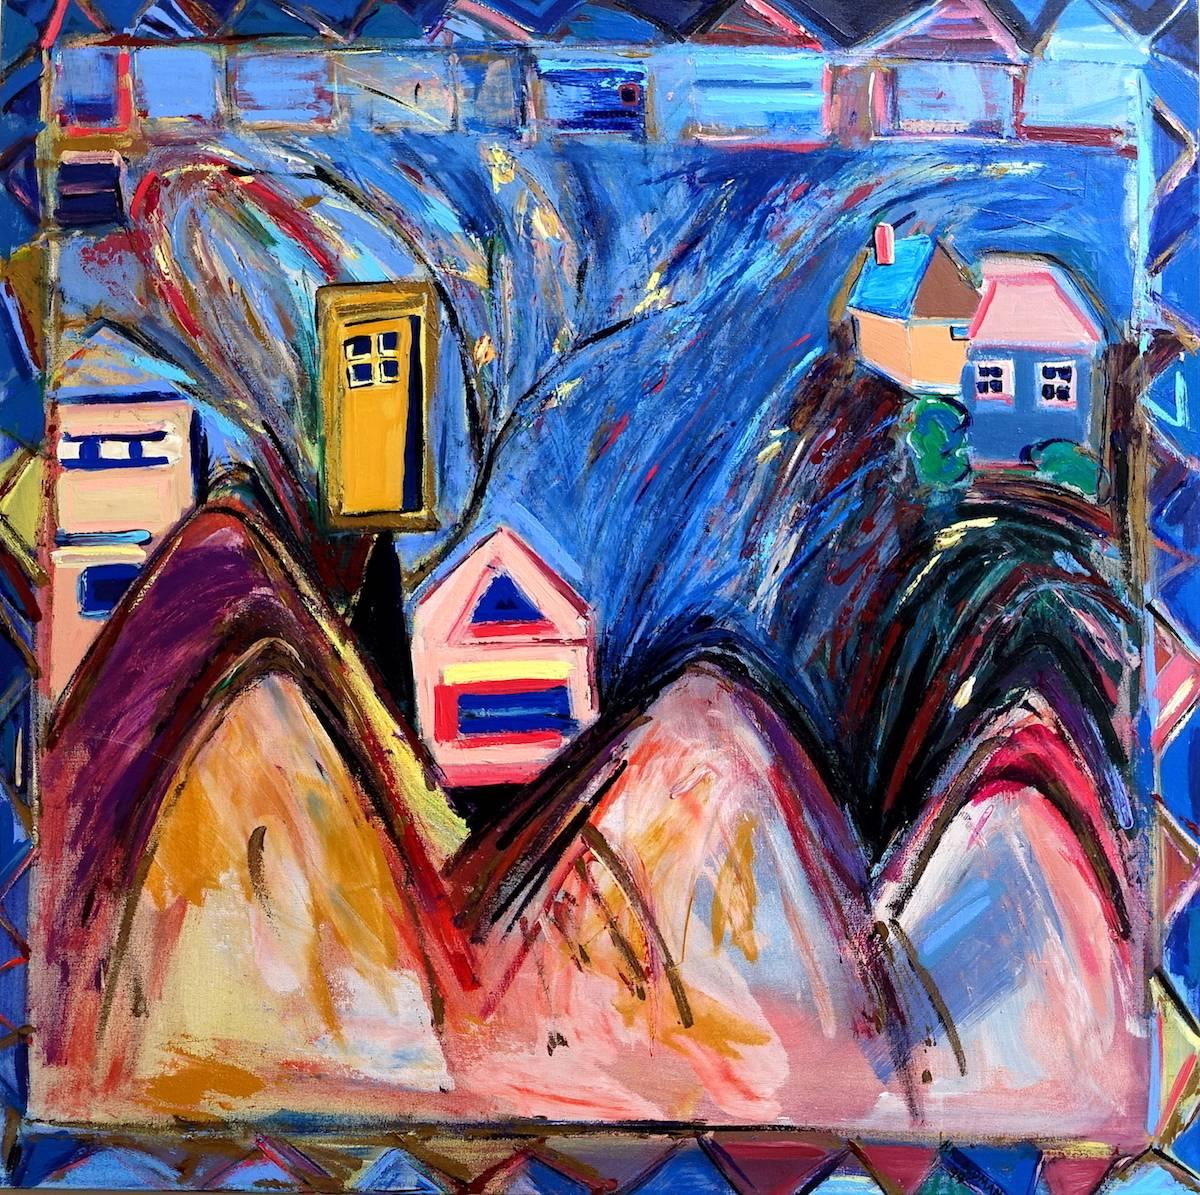 "The Hills Are Alive", landscape, houses, mountains, acrylic painting